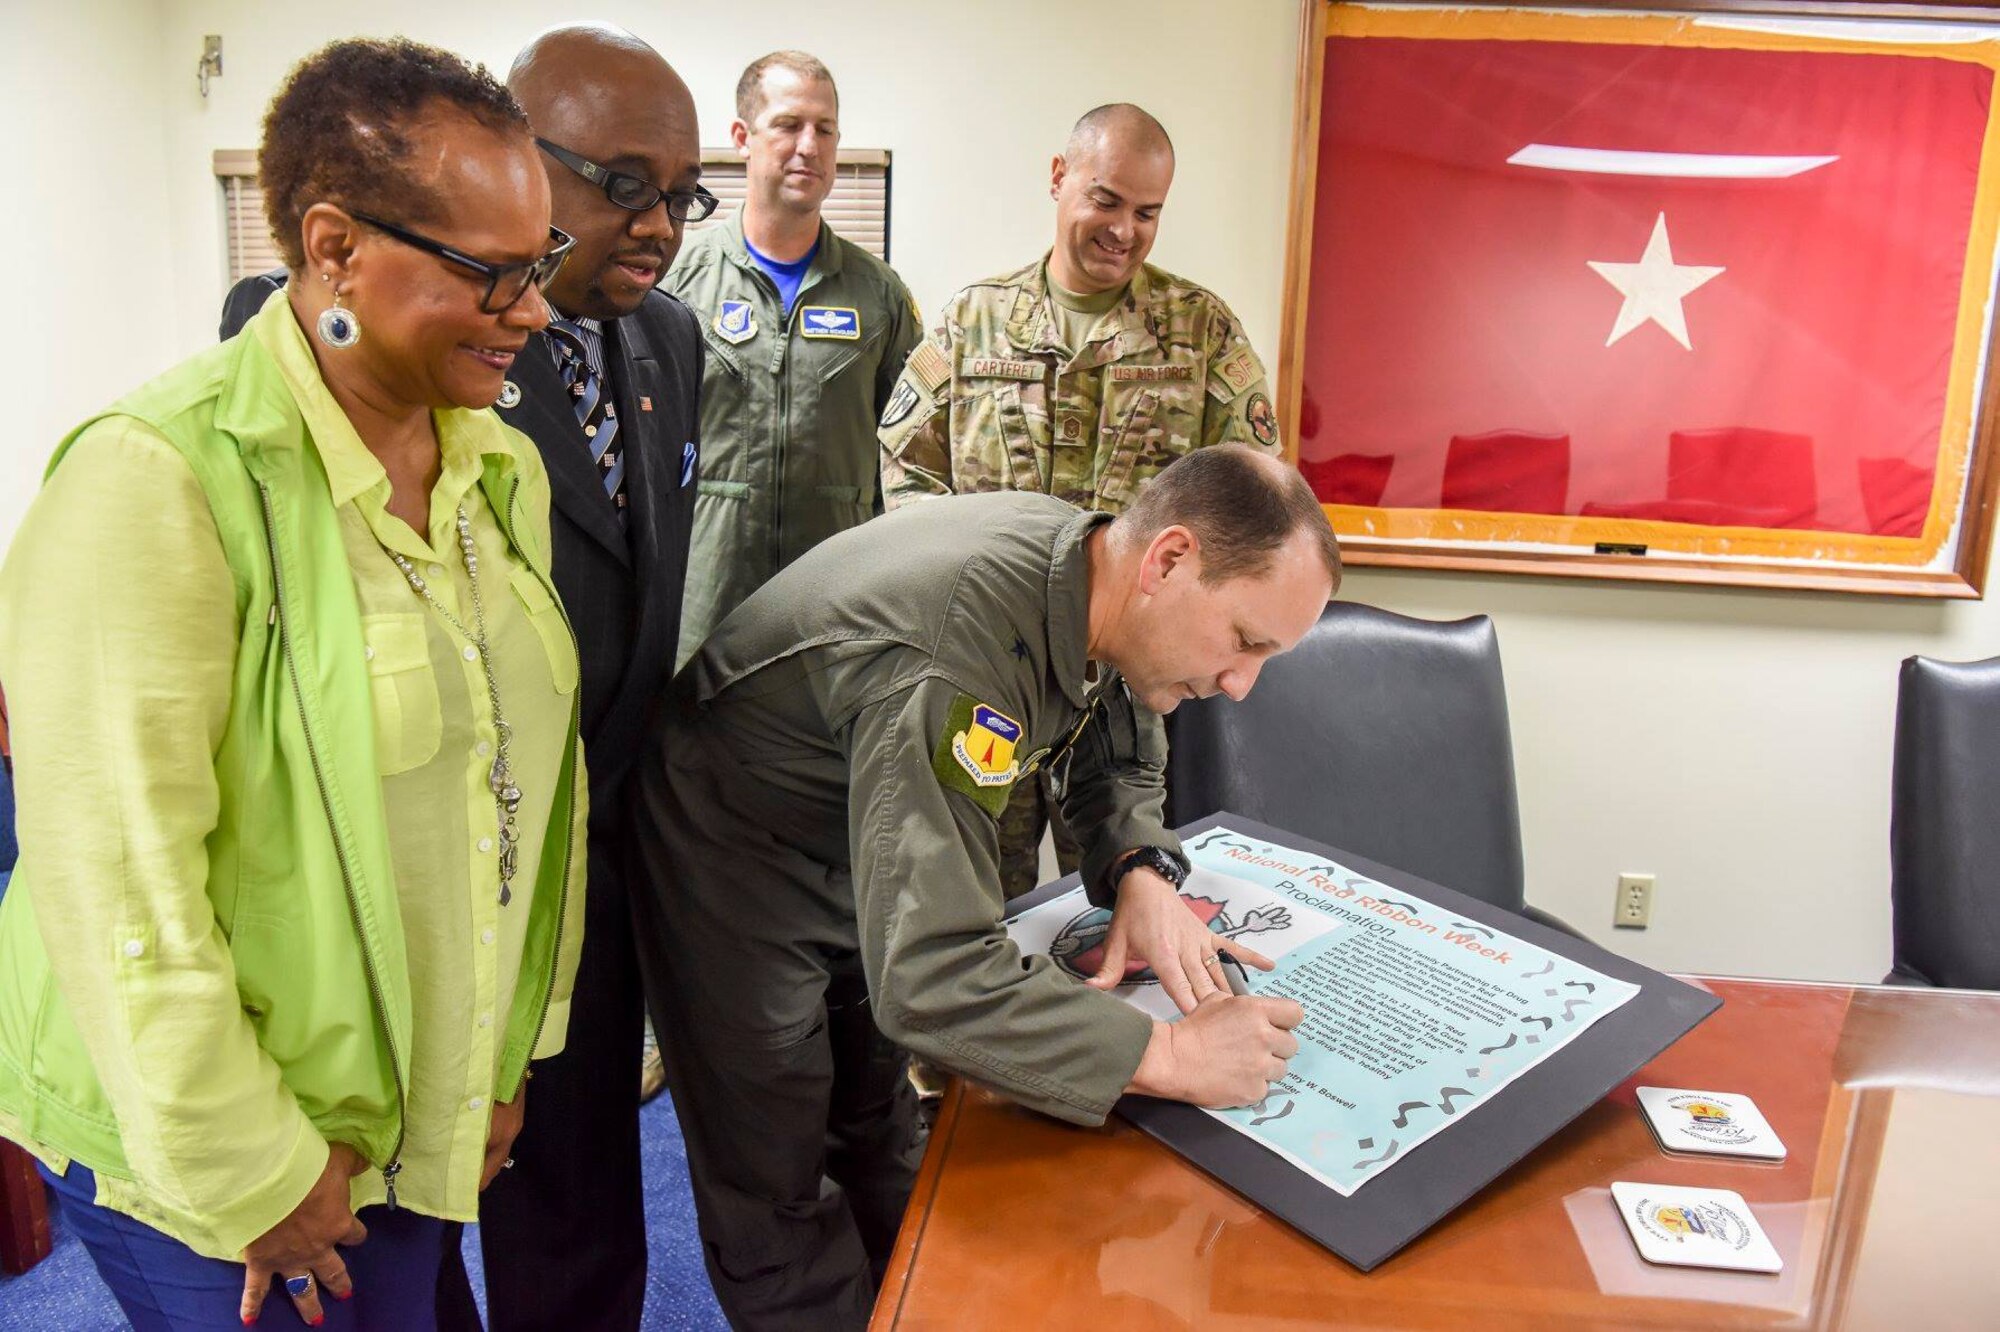 U.S. Air Force Brig. Gen. Gentry Boswell, 36 Wing Commander, signs a proclamation kicking off Red Ribbon week at Andersen Air Force Base, Guam, Oct. 26, 2018. (U.S. Air Force photo by Senior Airman Christopher Quail)